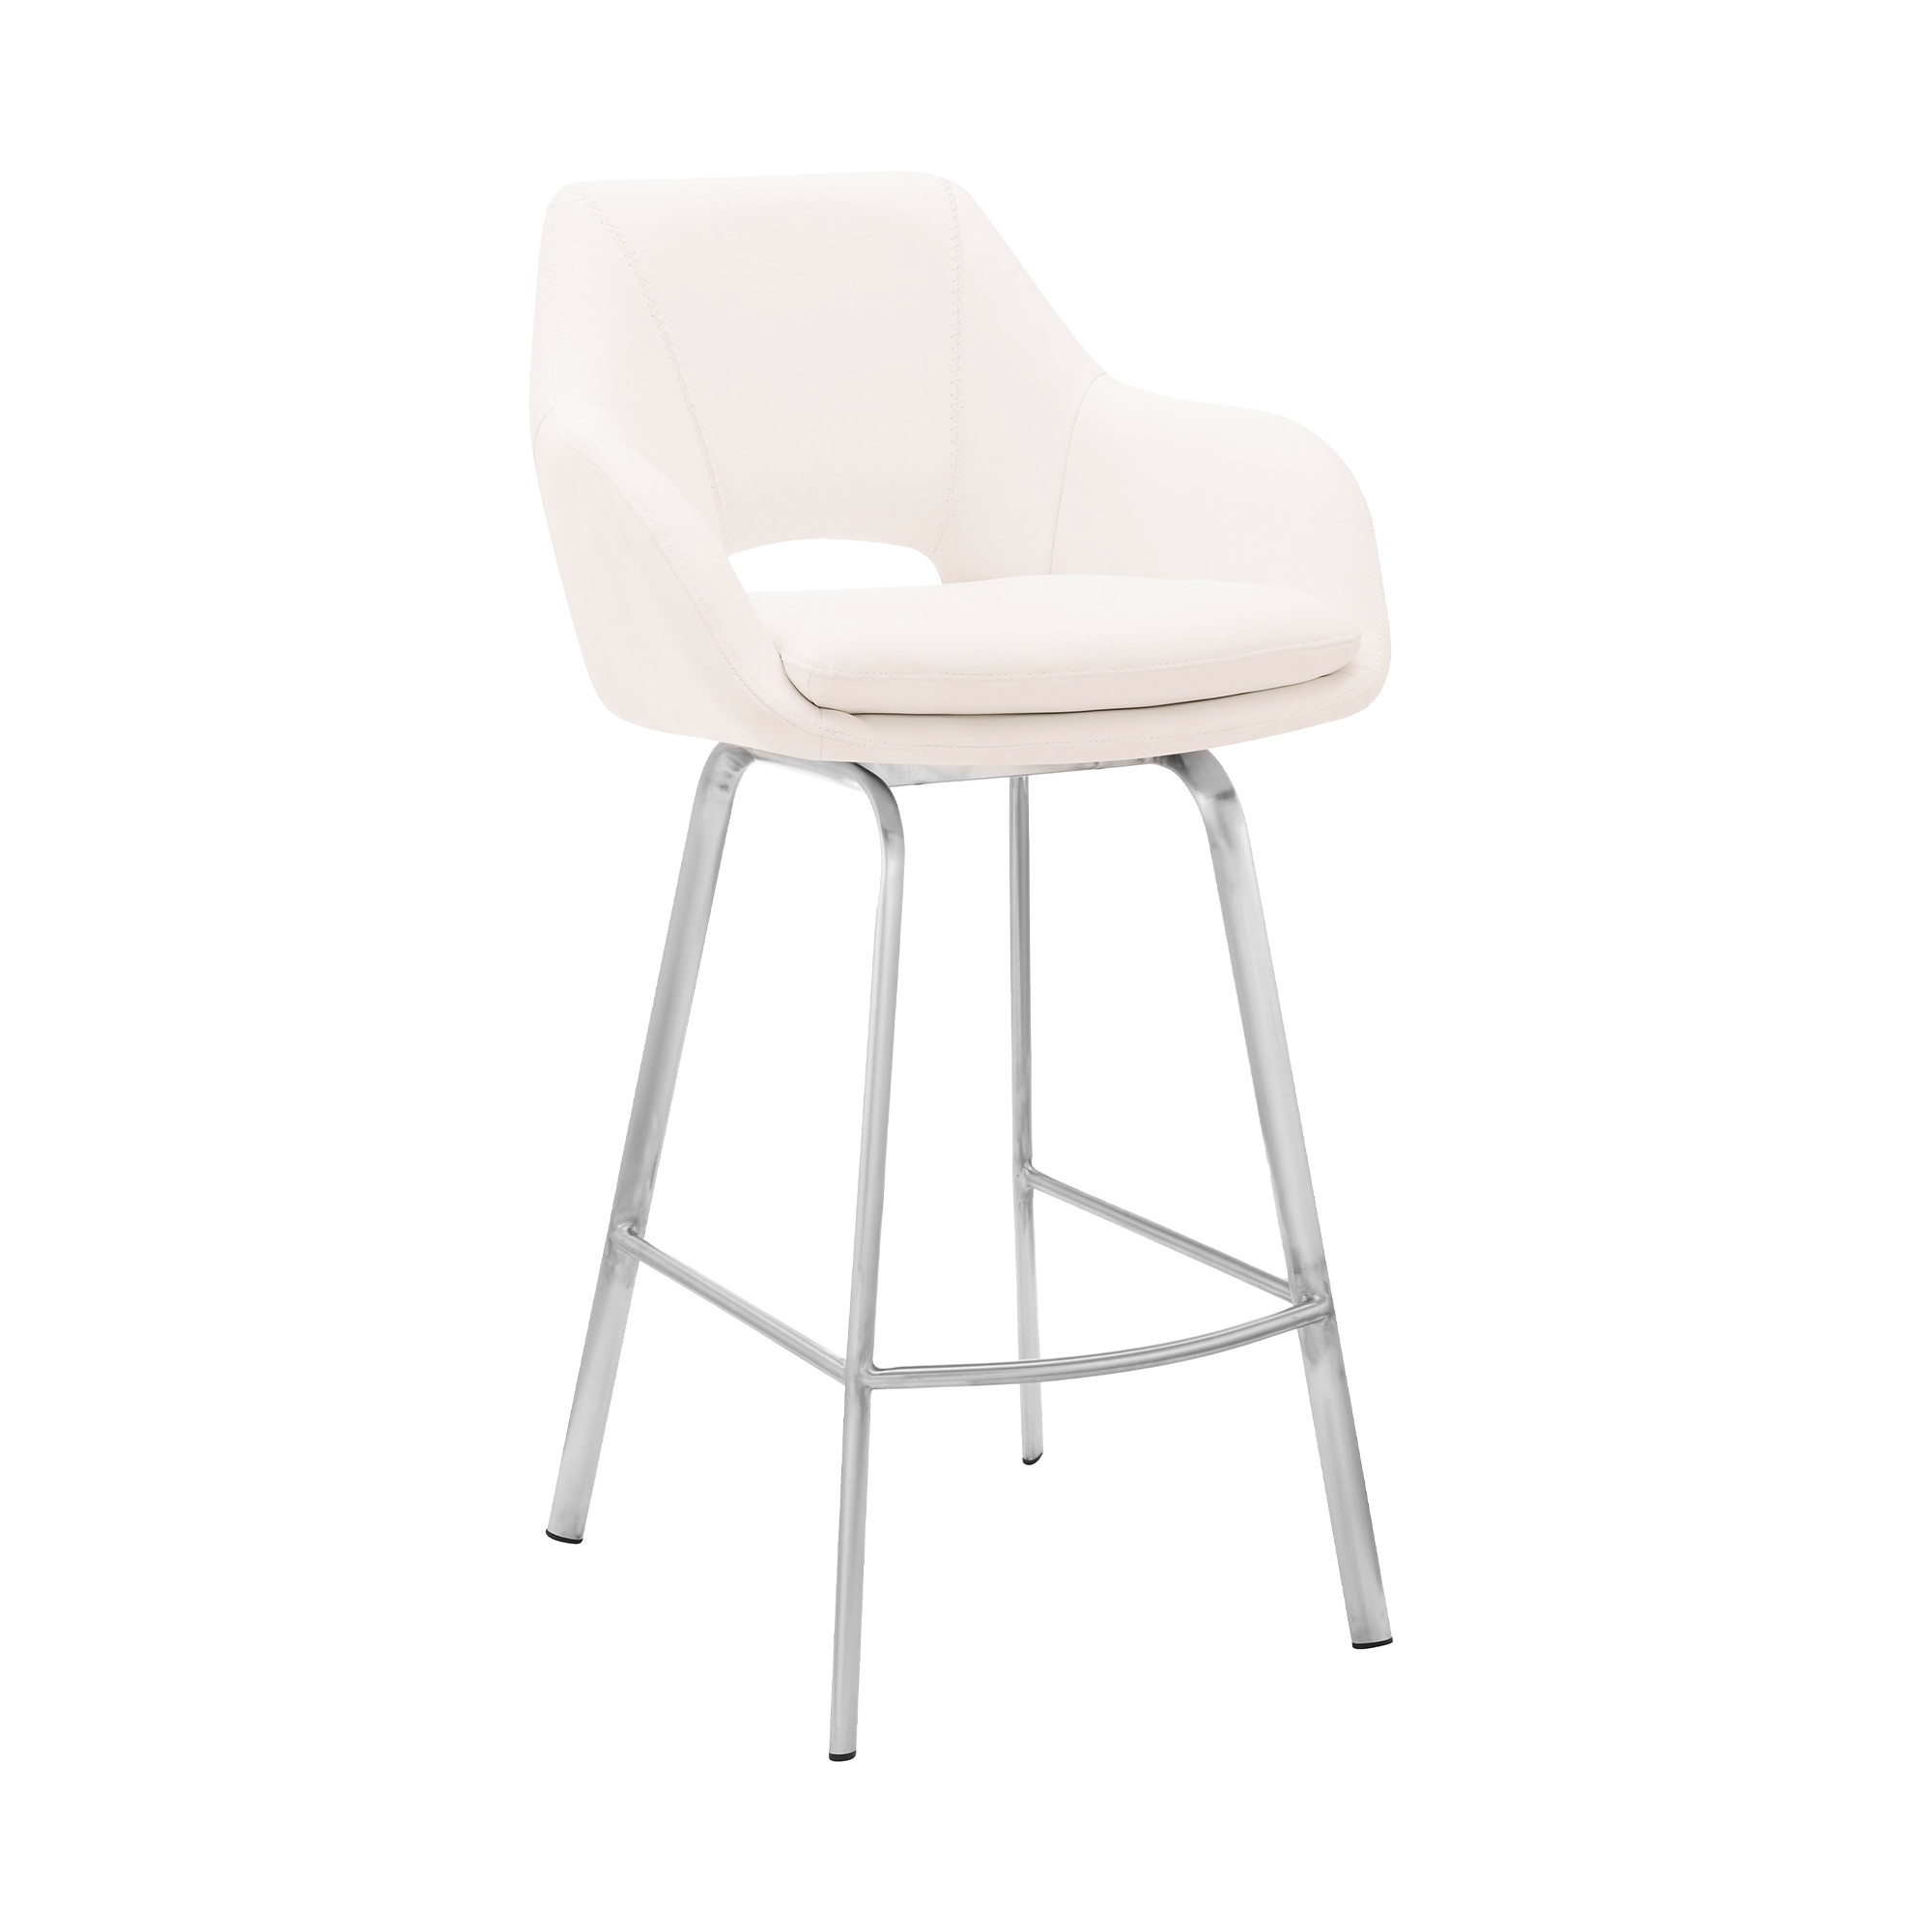 26" White Faux Leather and Stainless Steel Swivel Counter Stool